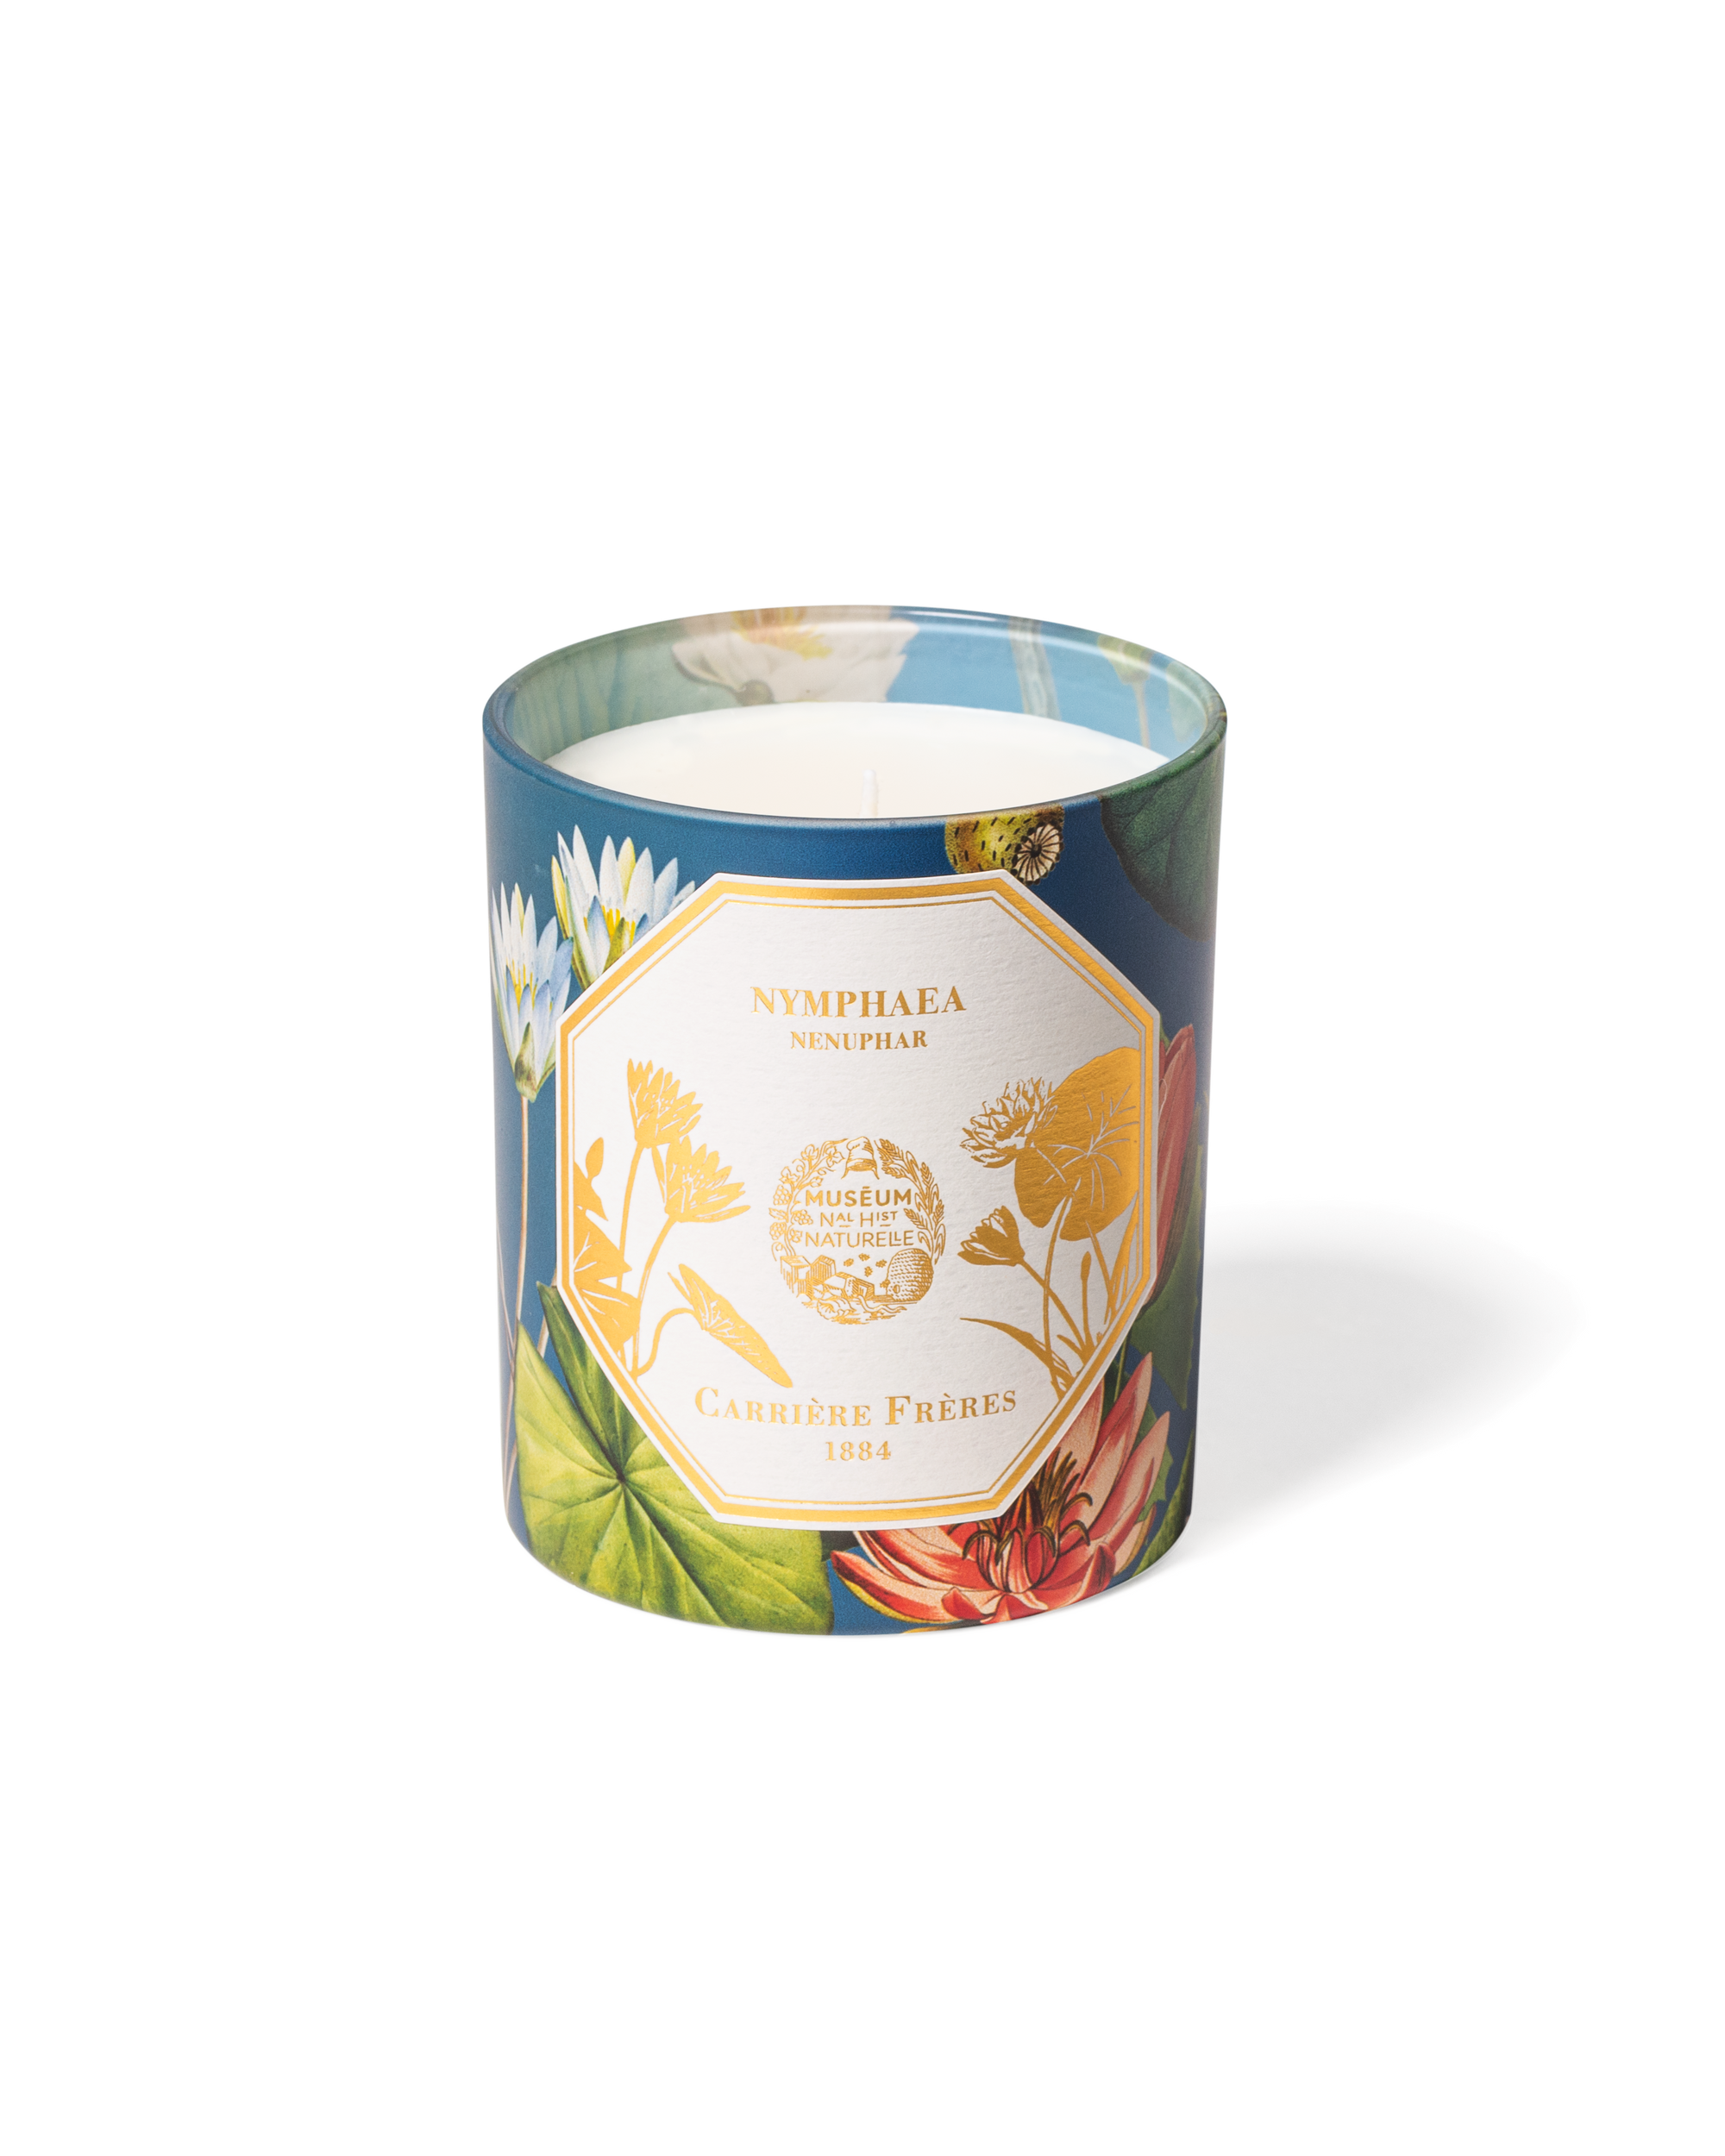 Carriere Freres Waterlily Nymphaea Scented Candle